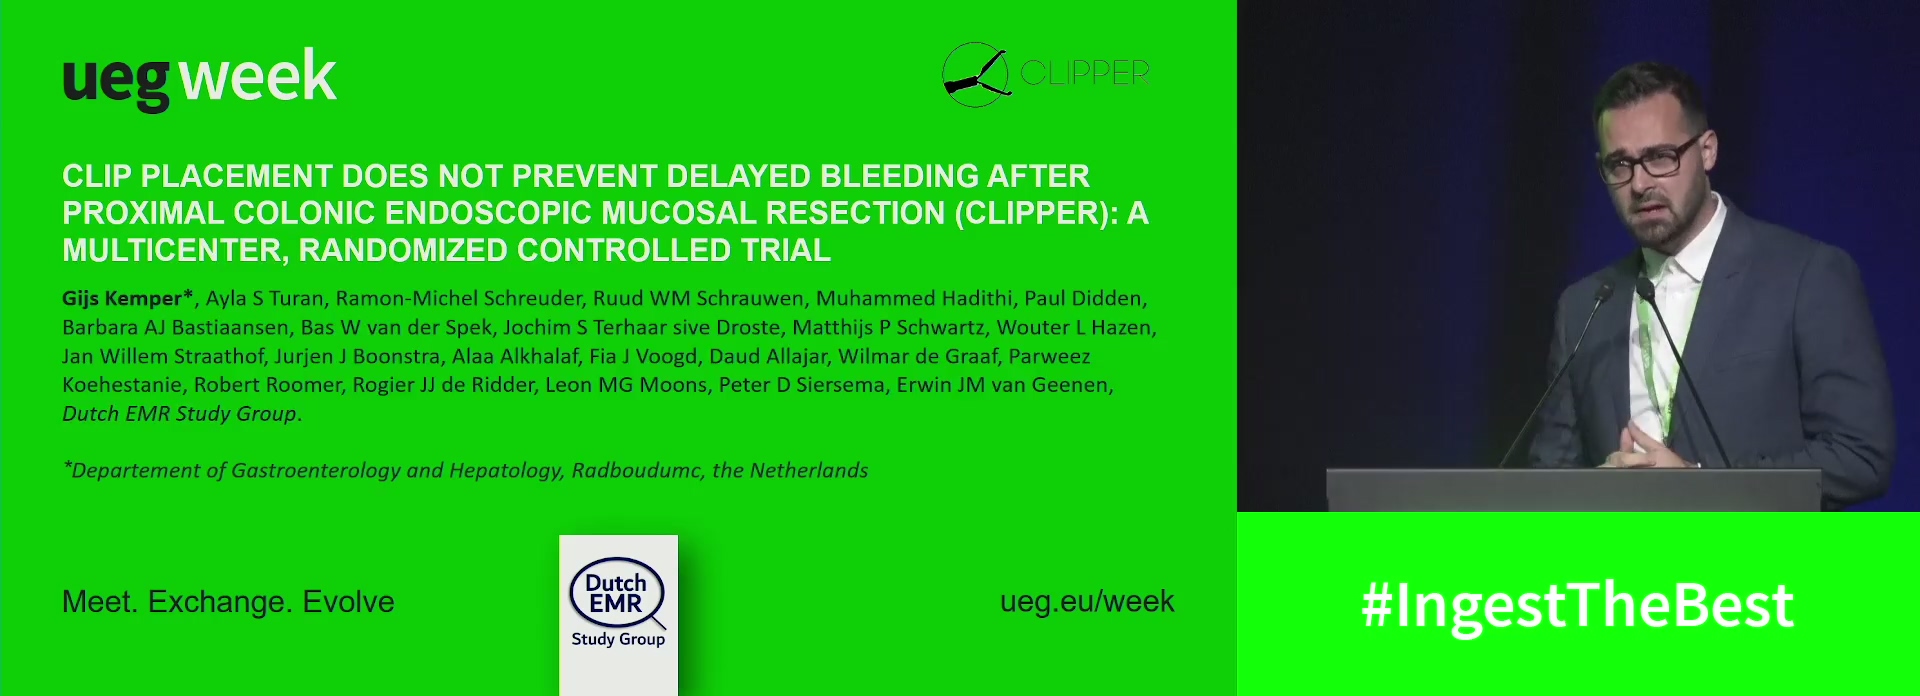 CLIP PLACEMENT DOES NOT PREVENT DELAYED BLEEDING AFTER PROXIMAL COLONIC ENDOSCOPIC MUCOSAL RESECTION (CLIPPER): A MULTICENTER, RANDOMIZED CONTROLLED TRIAL